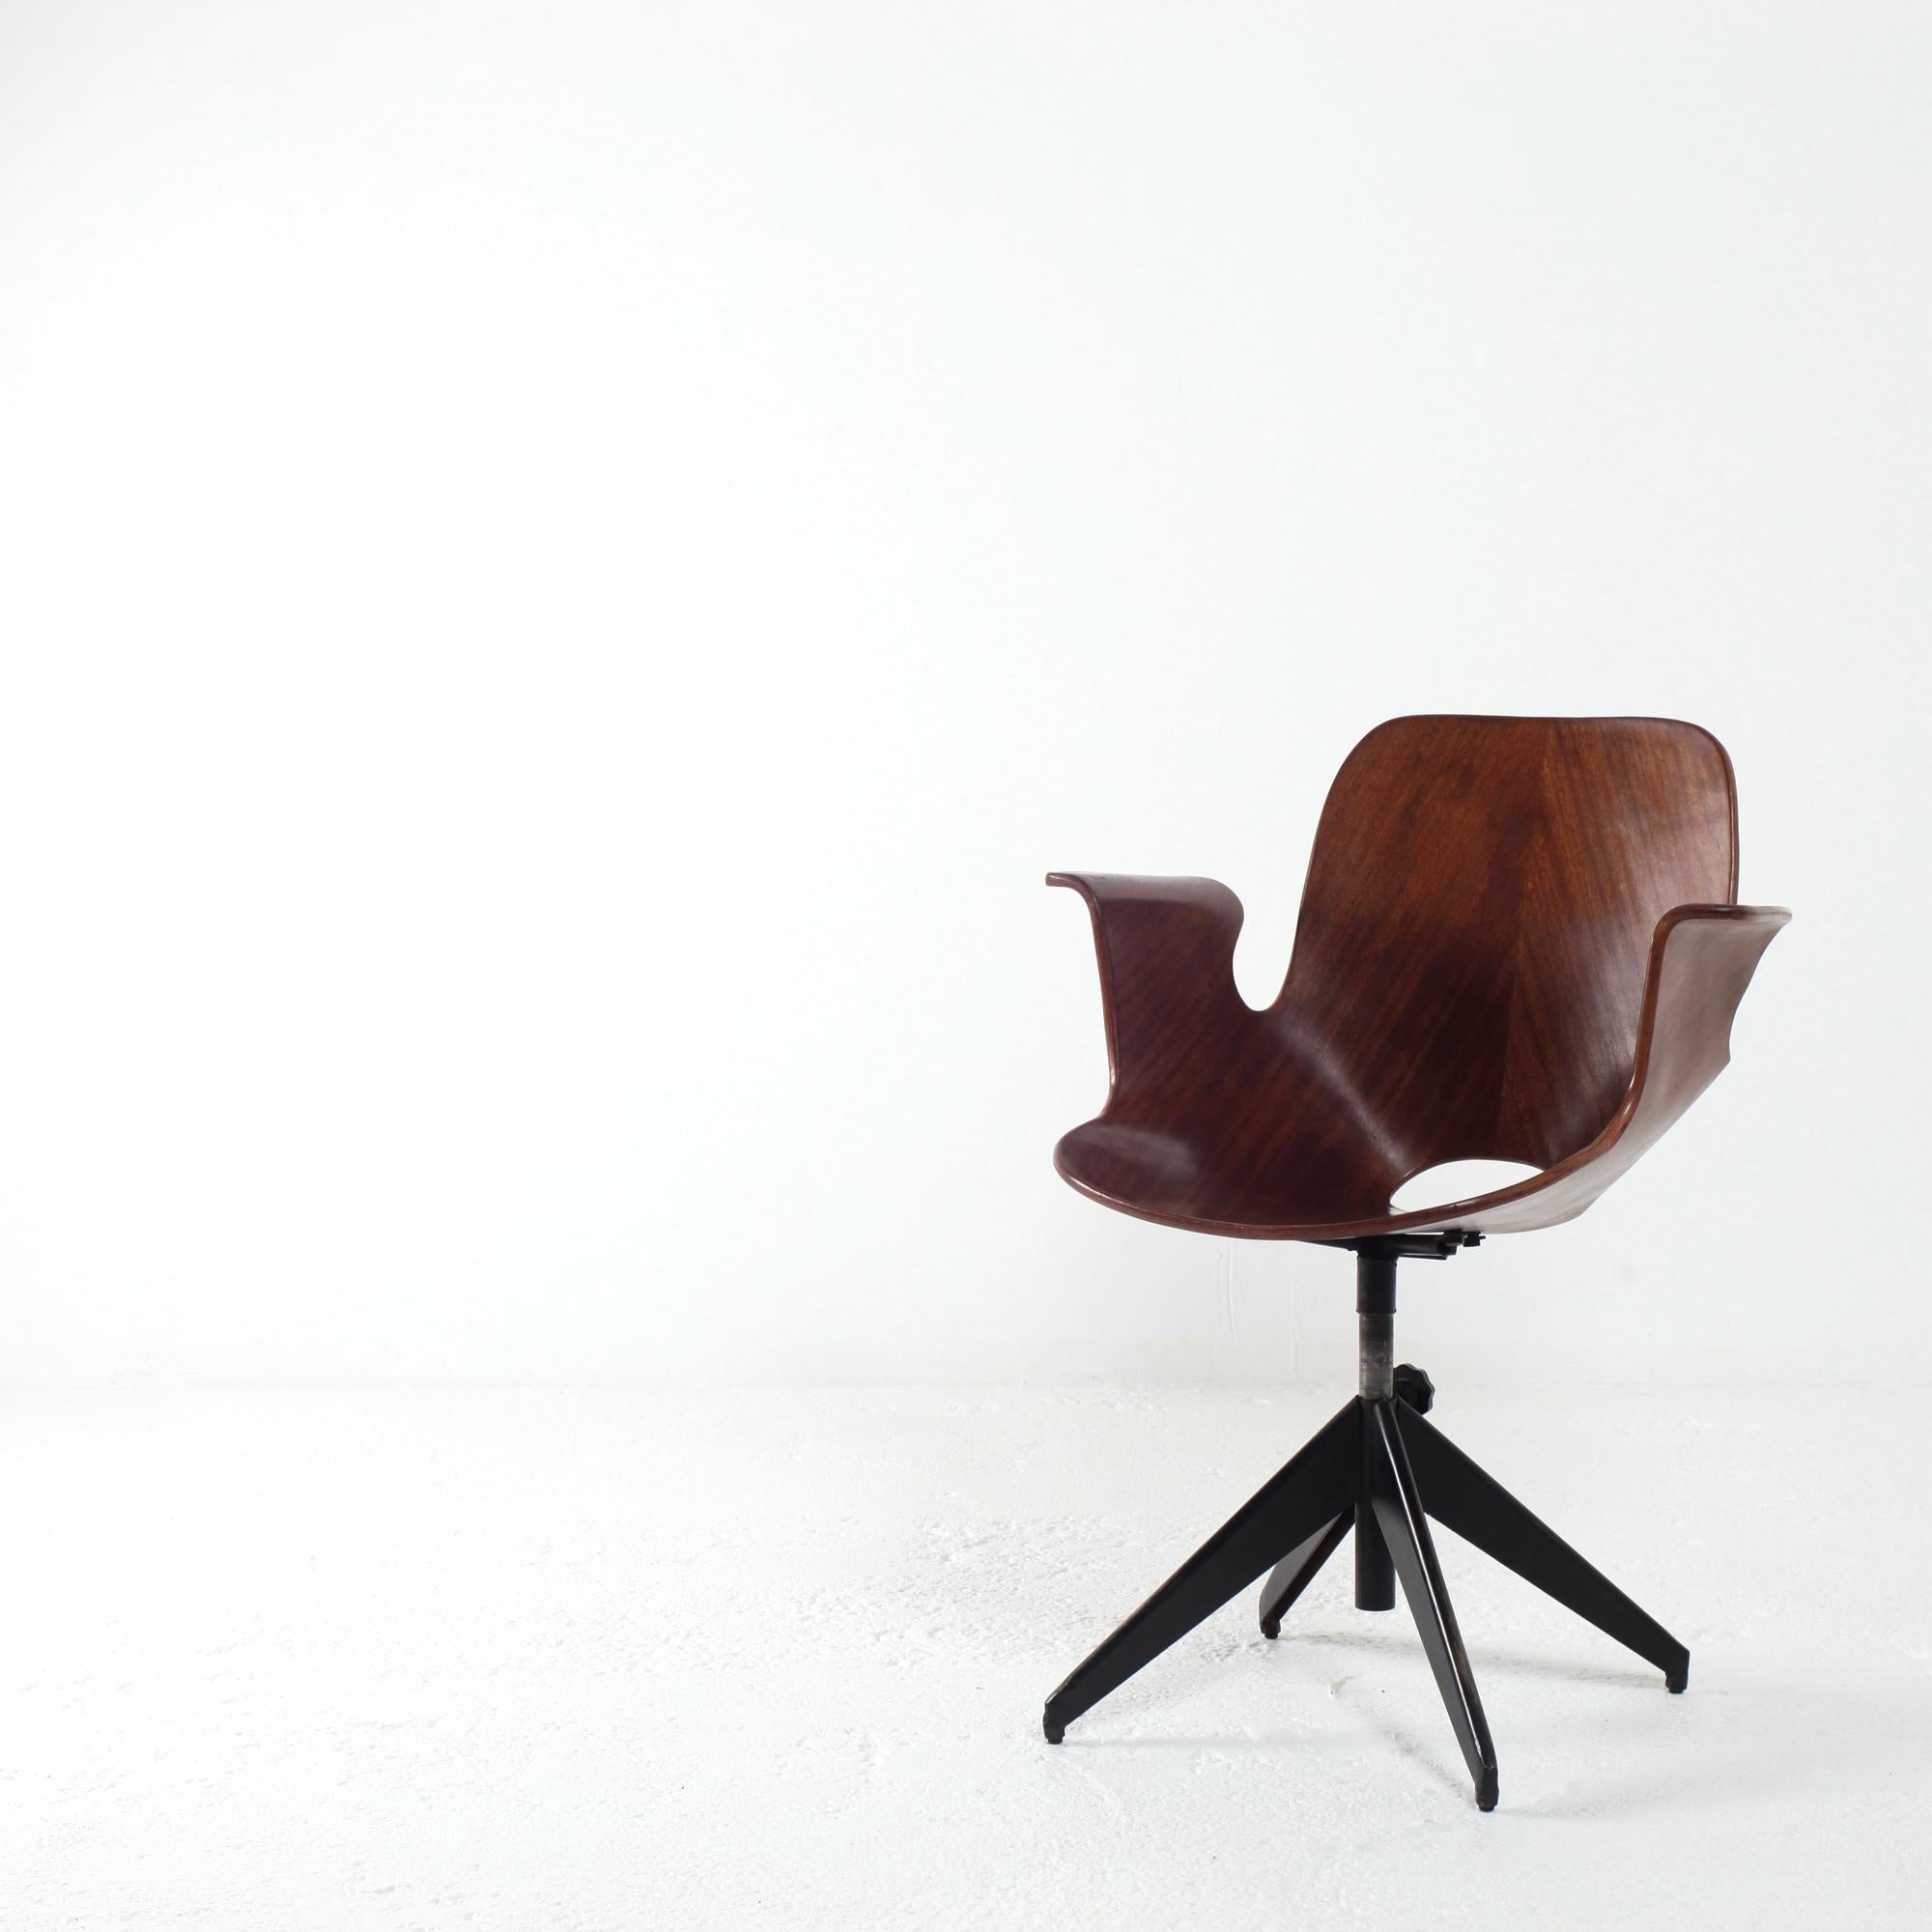 Beautiful Medea office chair by Vittorio Nobili. Produced by Fratelli Tagliabue in Italy circa 1955.
Teak plywood seat with black base adjustable and 360 ° swivel.
Adjustable seat height from 38 cm to 49 cm
Nobili's chair won the Compasso d'Oro